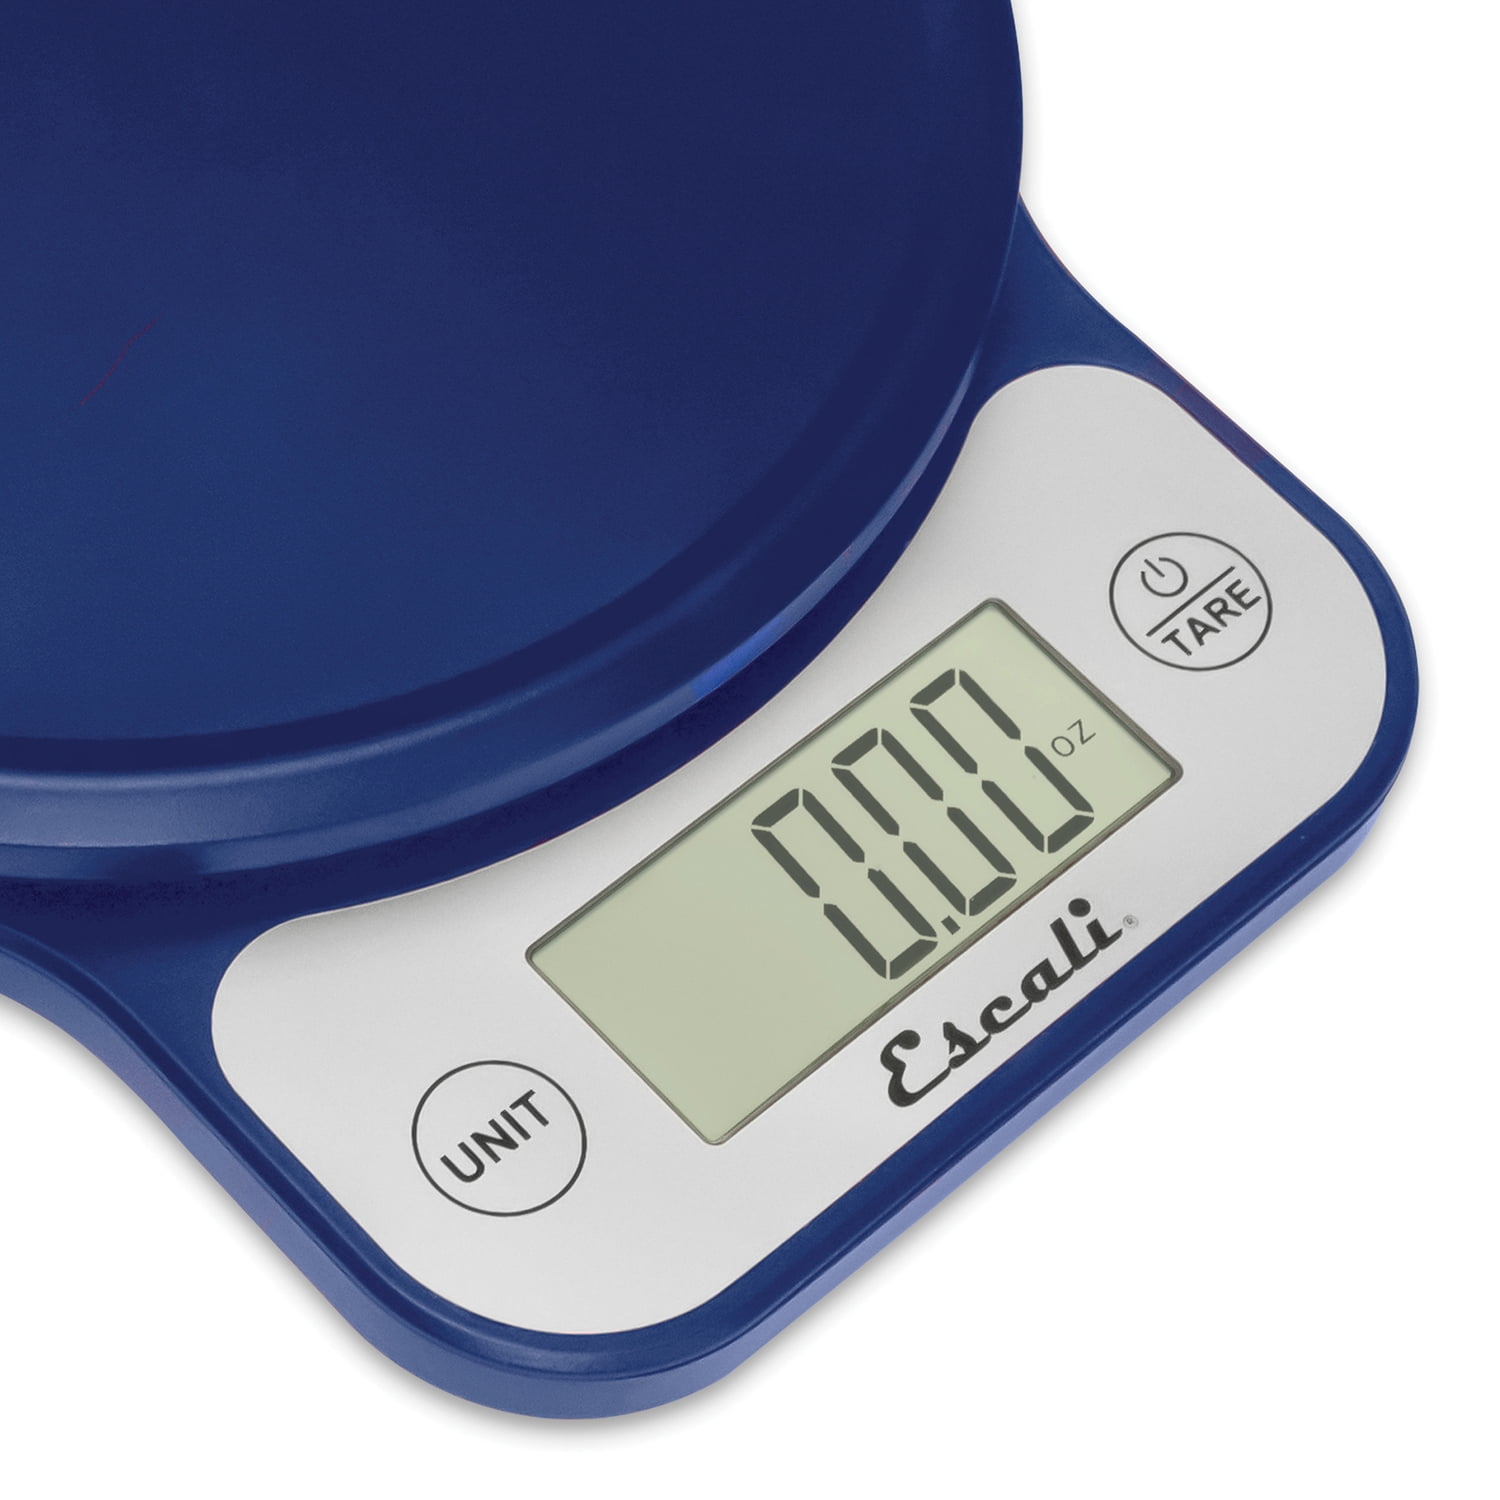 How To Use Digital Kitchen Scales - www.